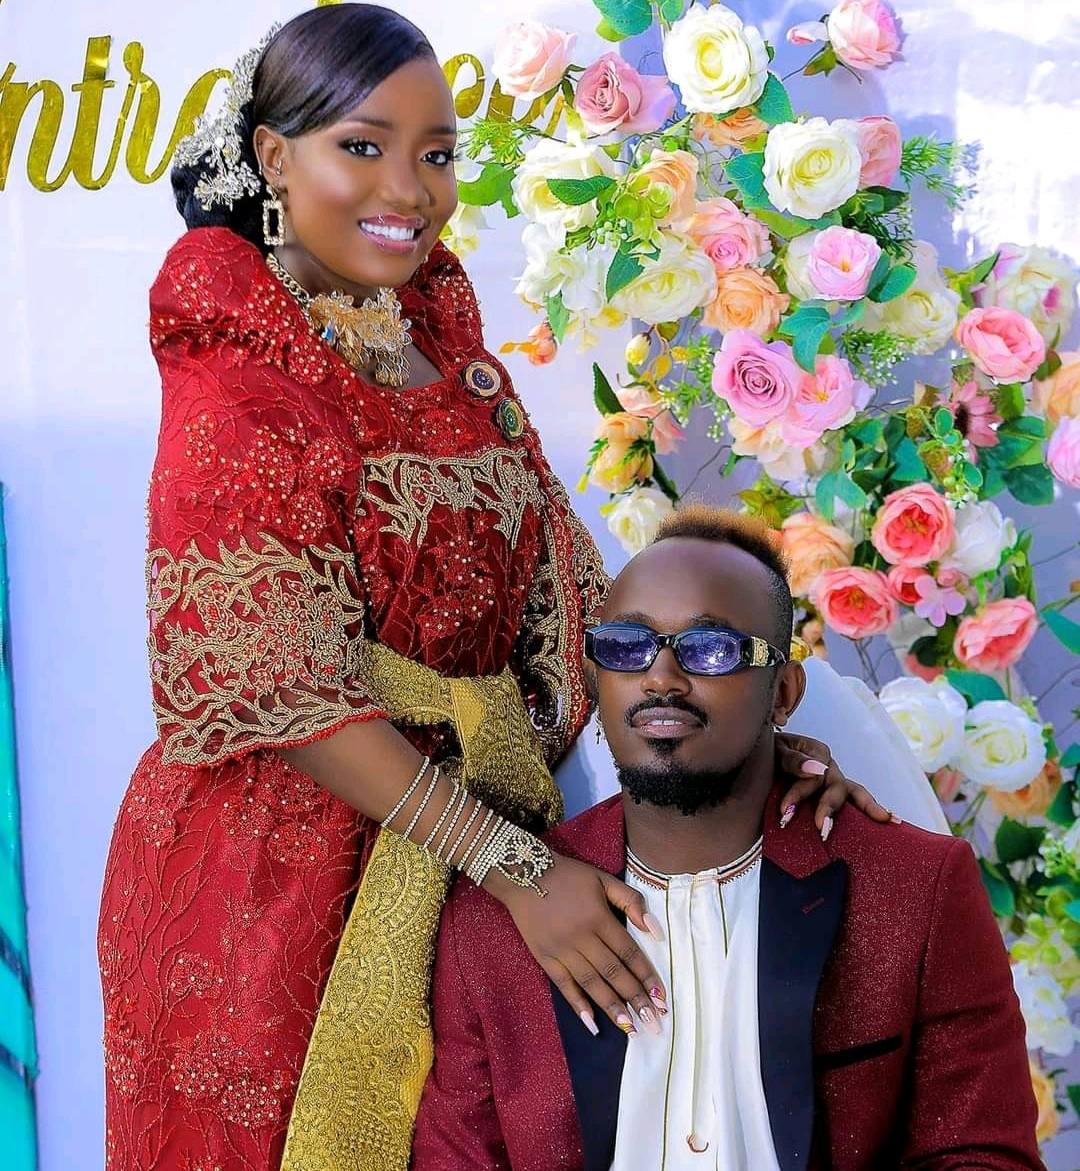 Ykee Benda and His Wife Lydia Jazmine Fail to Convince Fans With Chinese Wedding